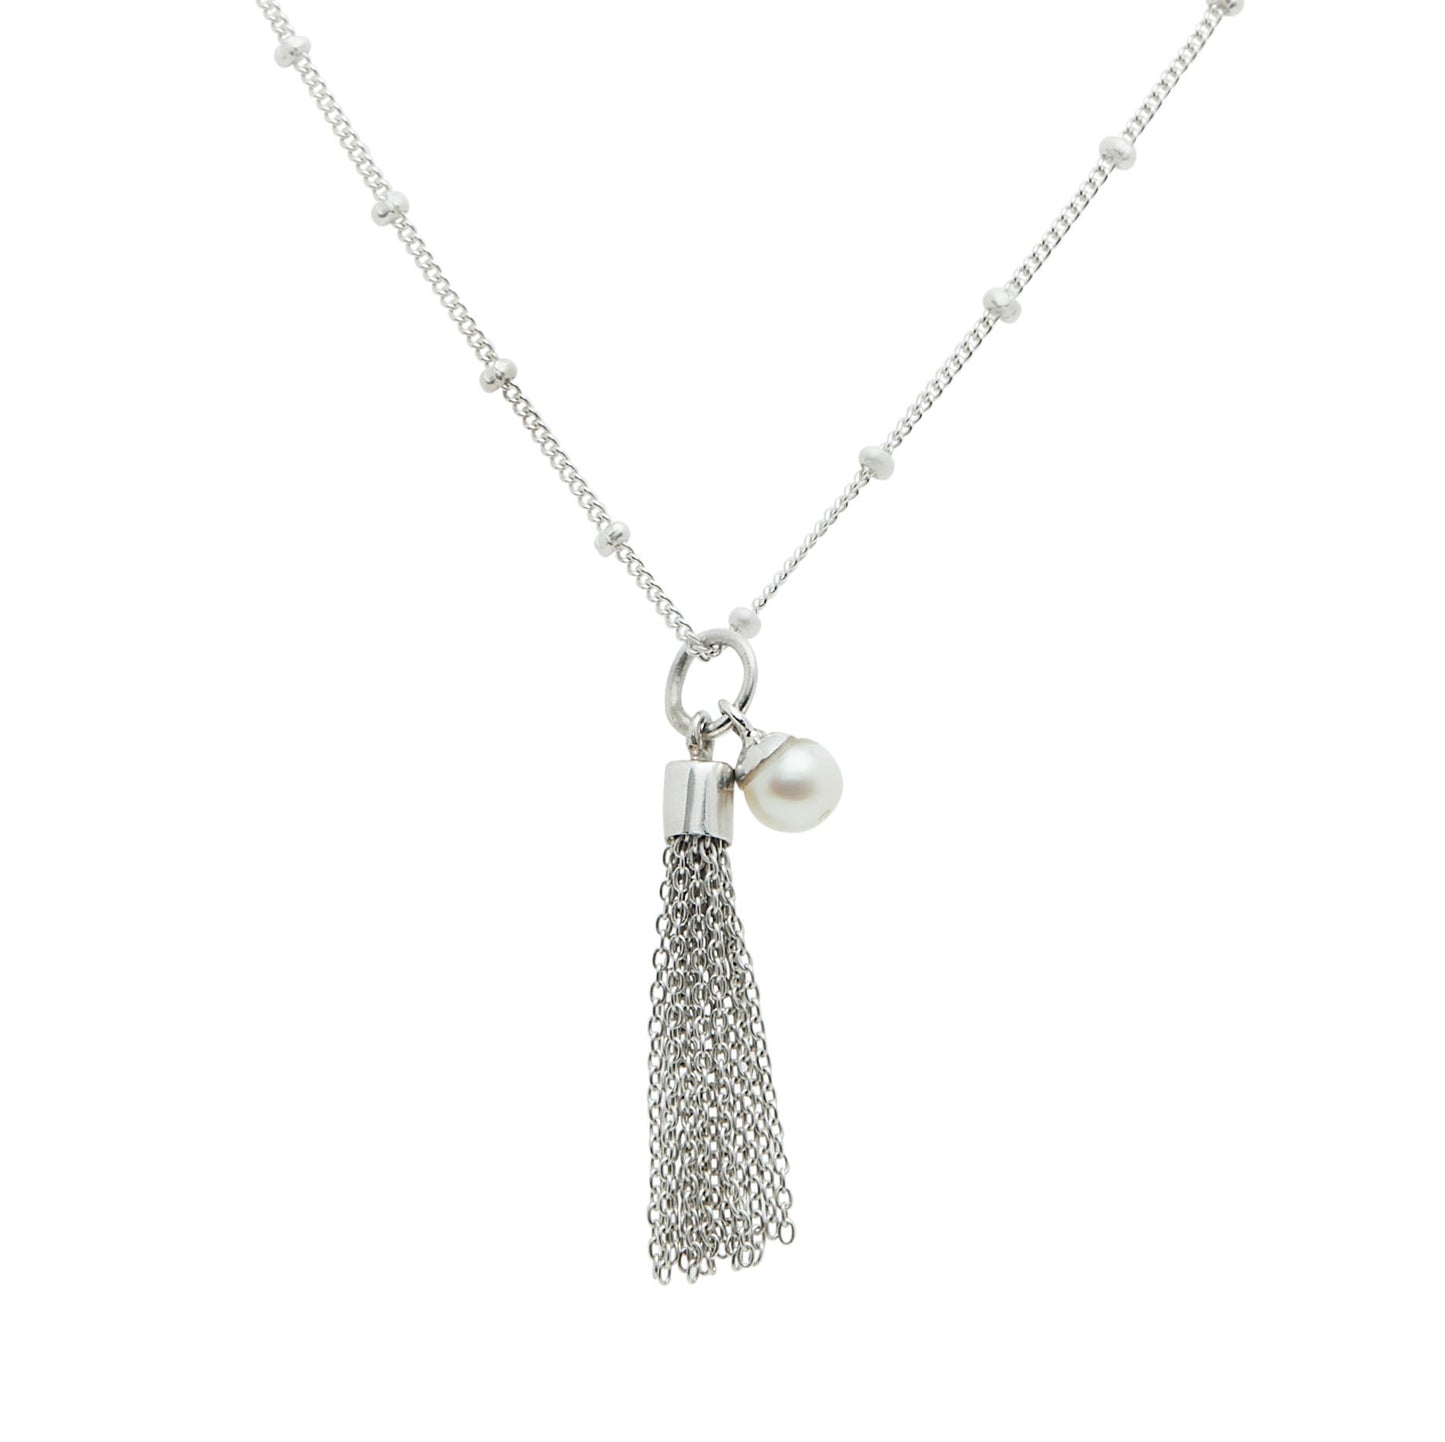 Silver Tassel Necklace with Small Pearl